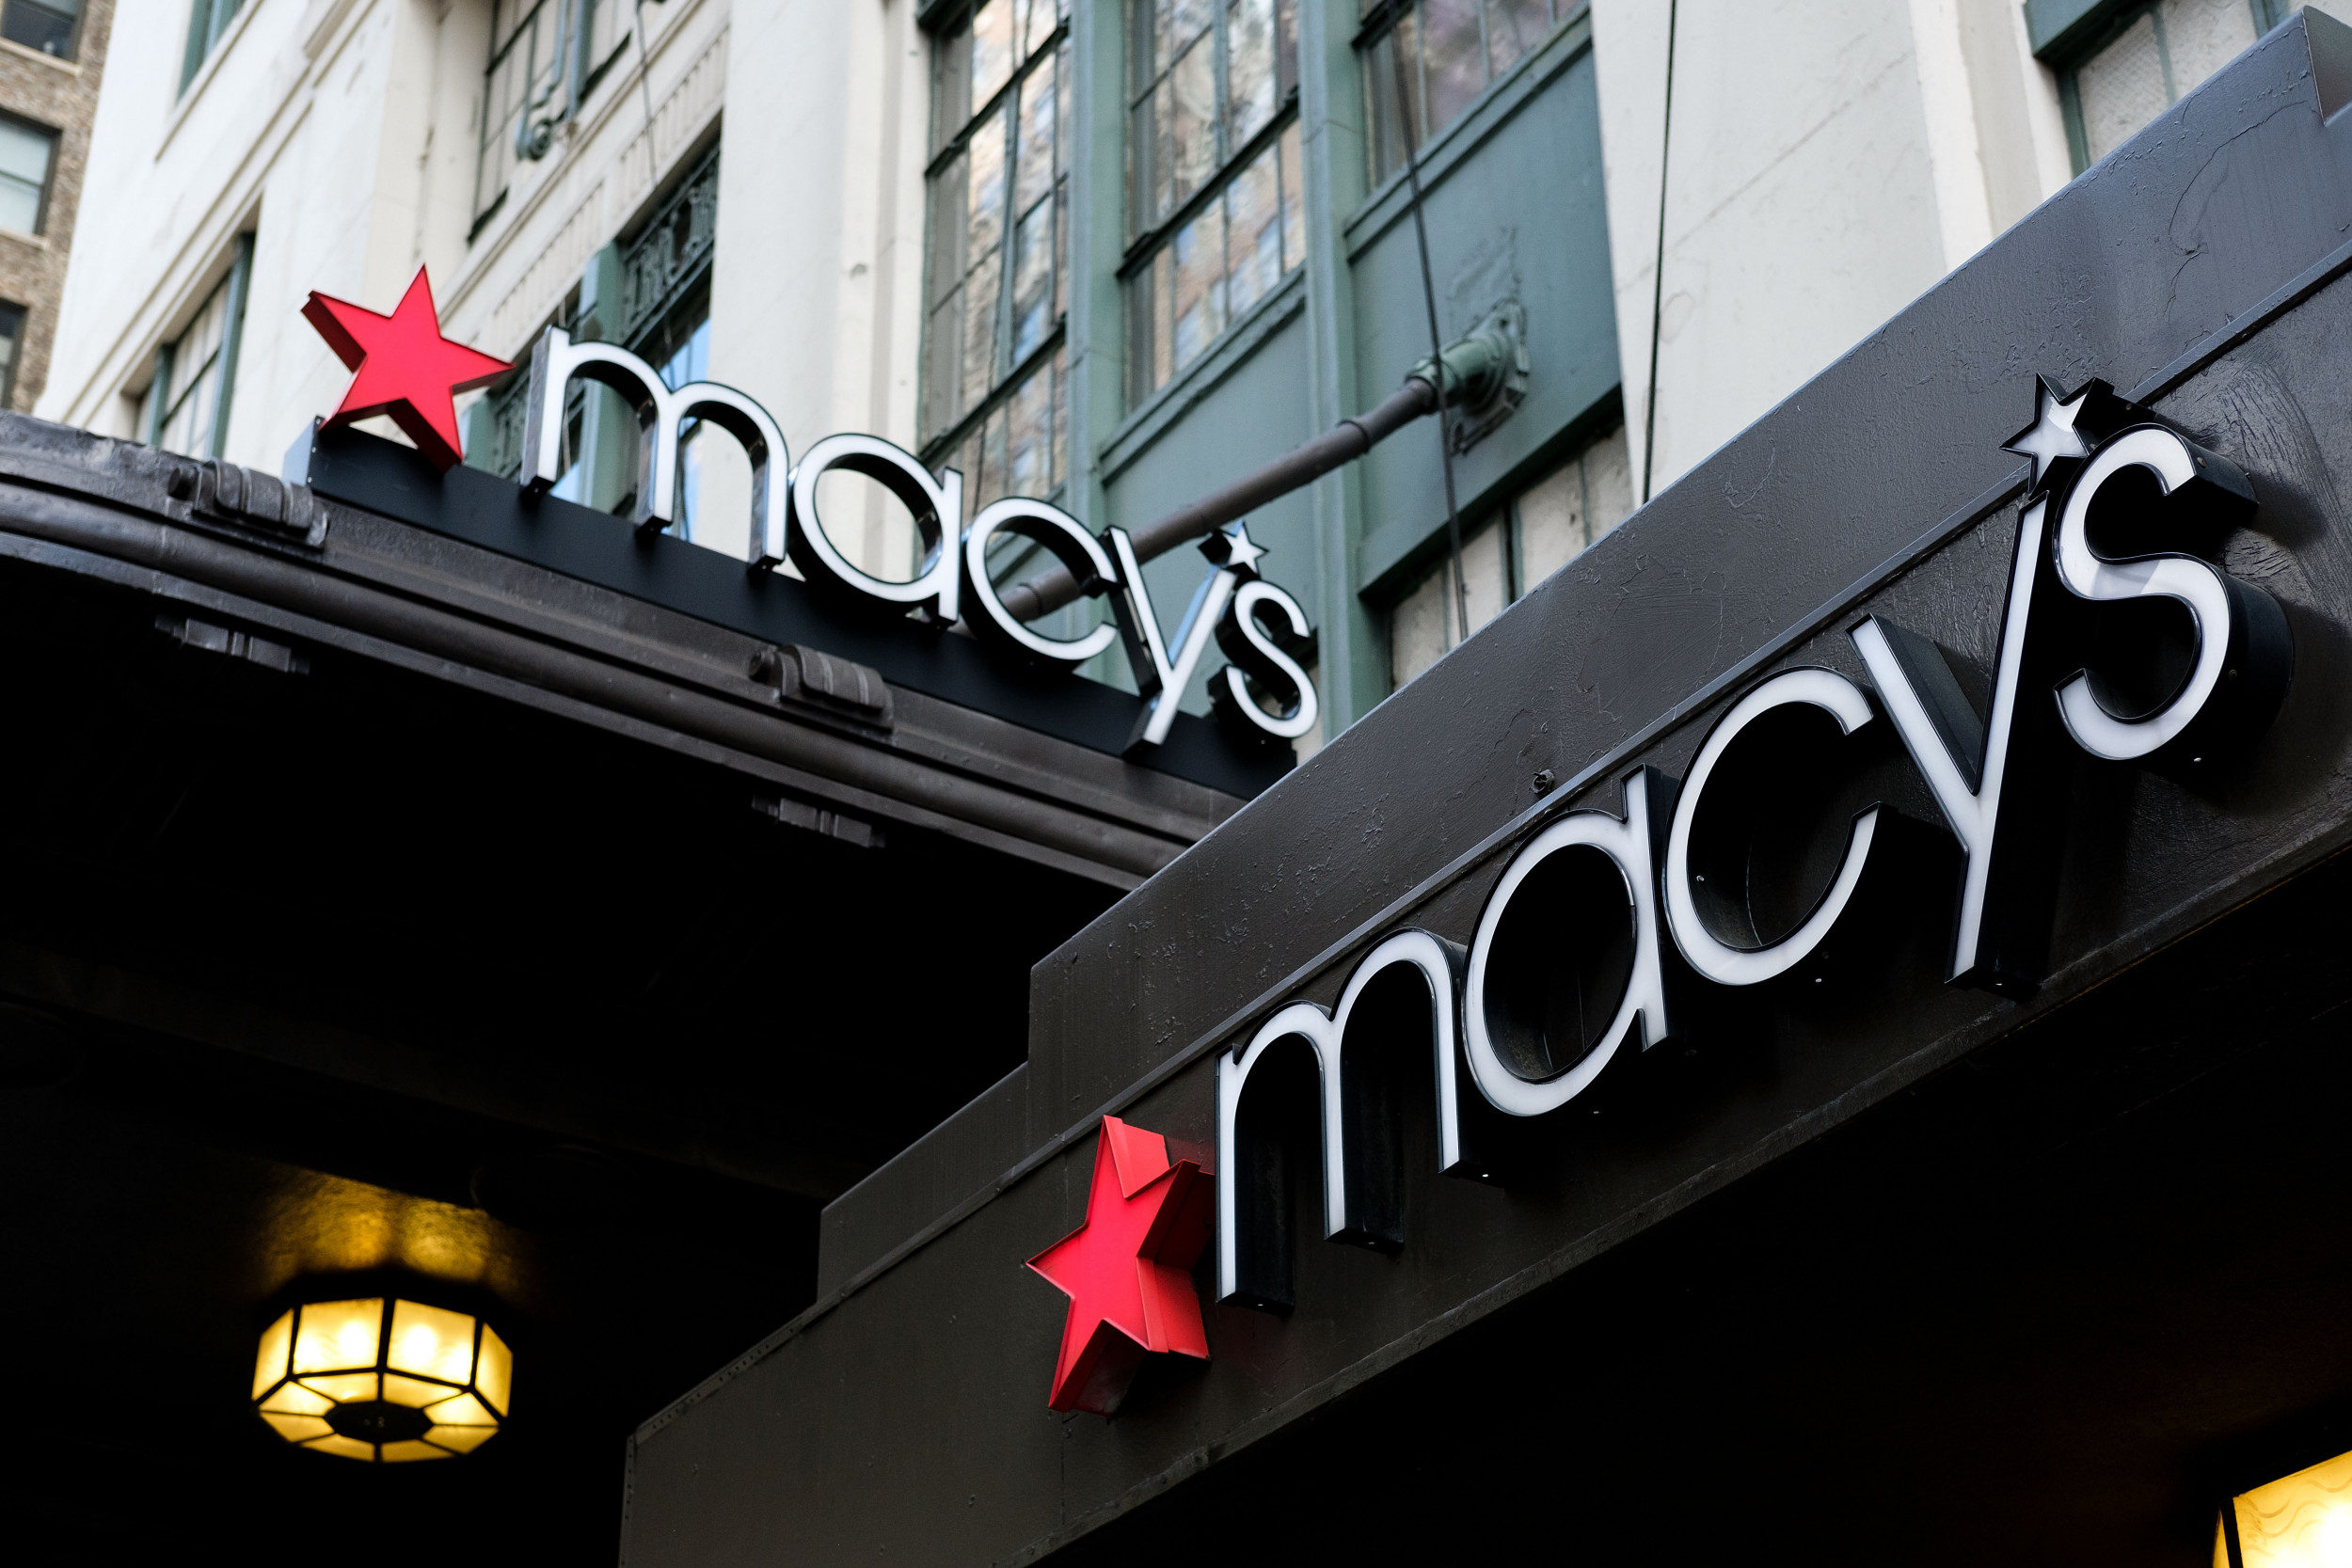 Macy's Black Friday July 2020 Bag 50 Percent Discounts With These Deals